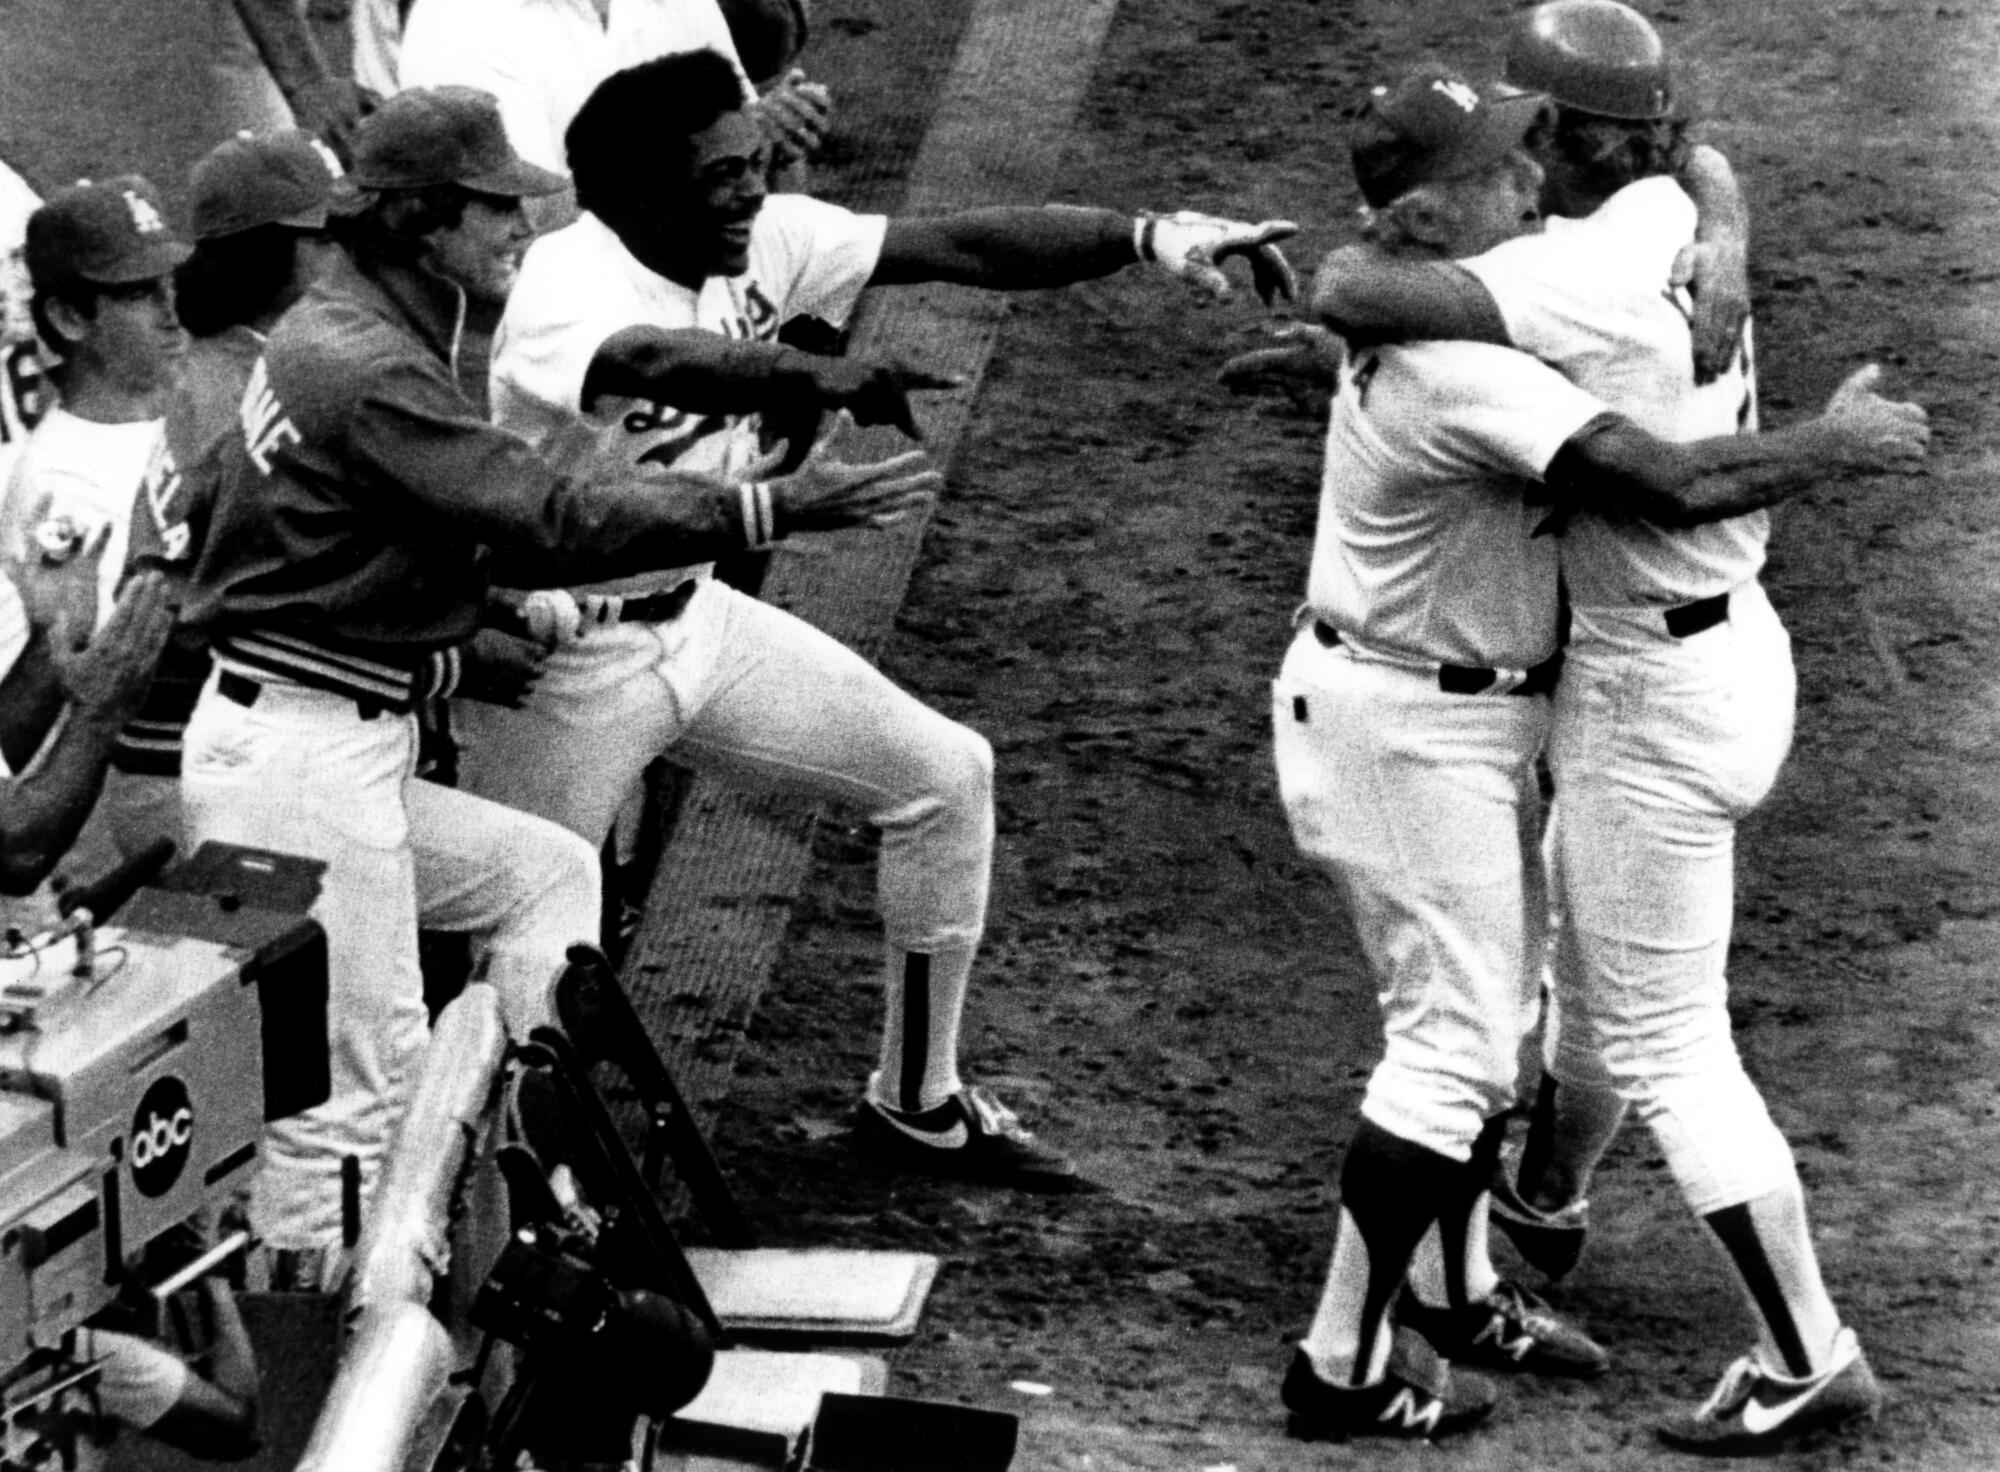 Tommy Lasorda hugs Steve Yeager after Yeager hit a home run in Game 5 of the 1981 World Series against the New York Yankees